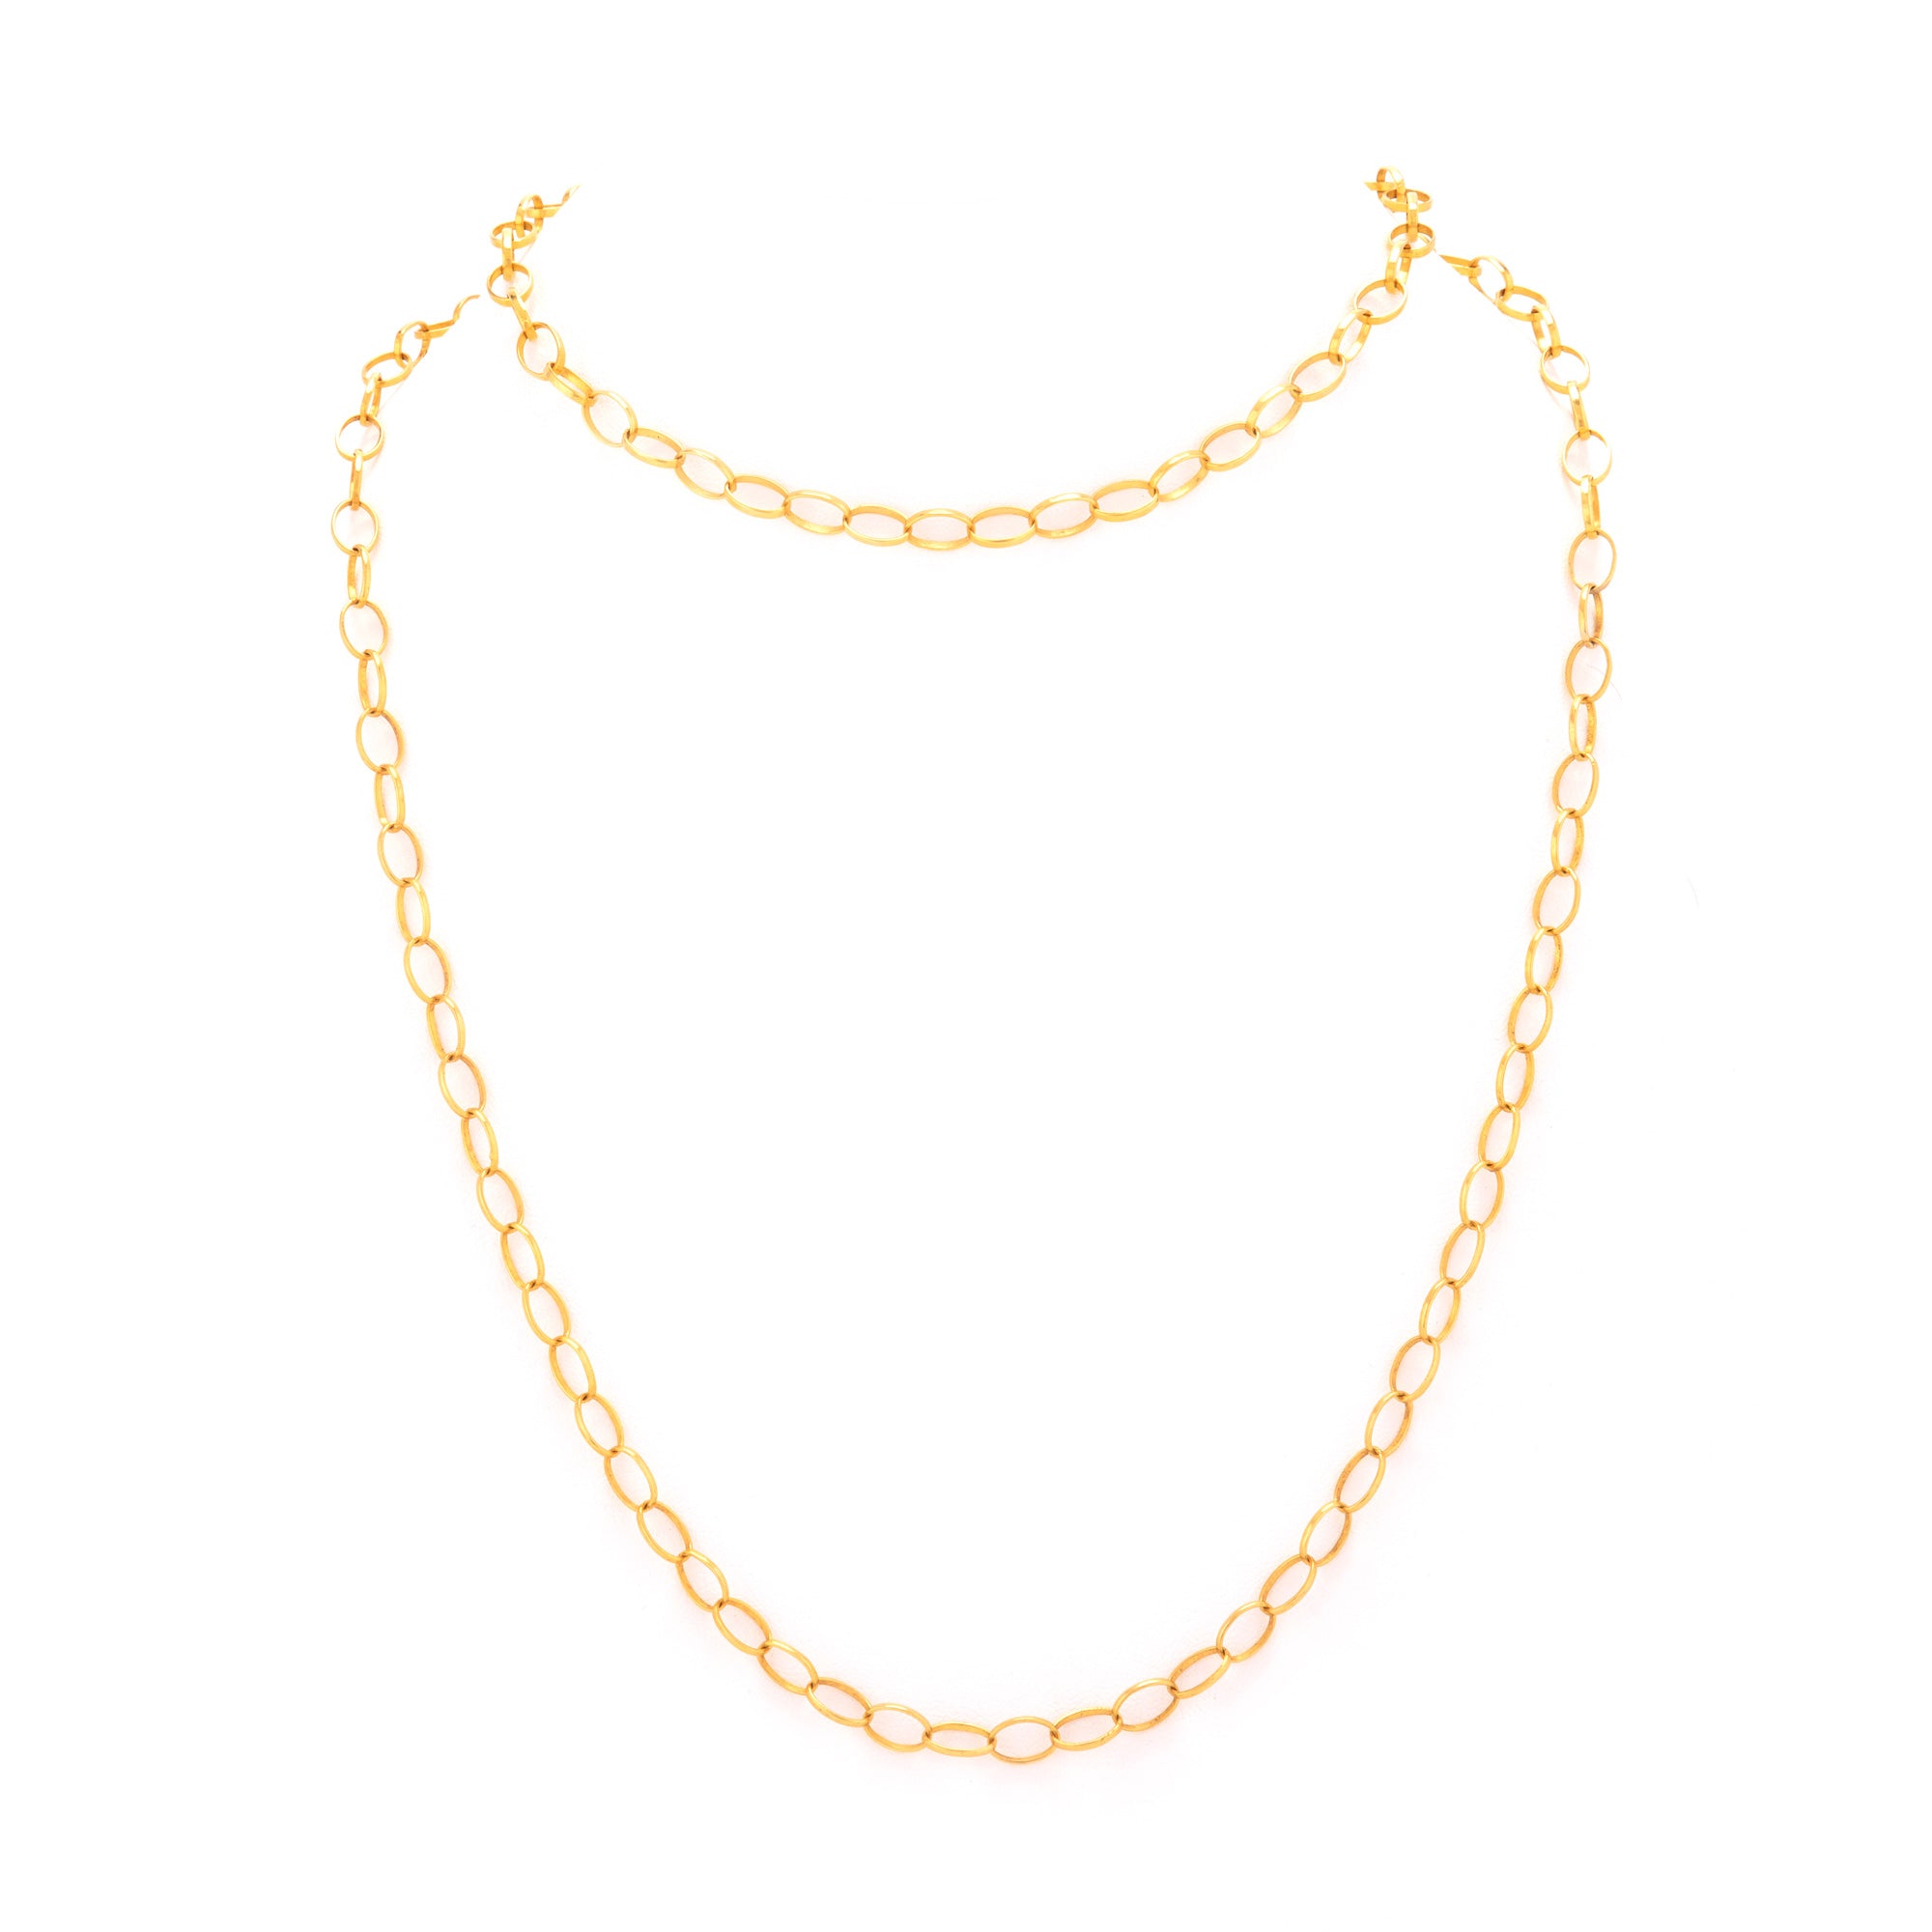 14K Gold Extra Large Open Link Chain Necklace